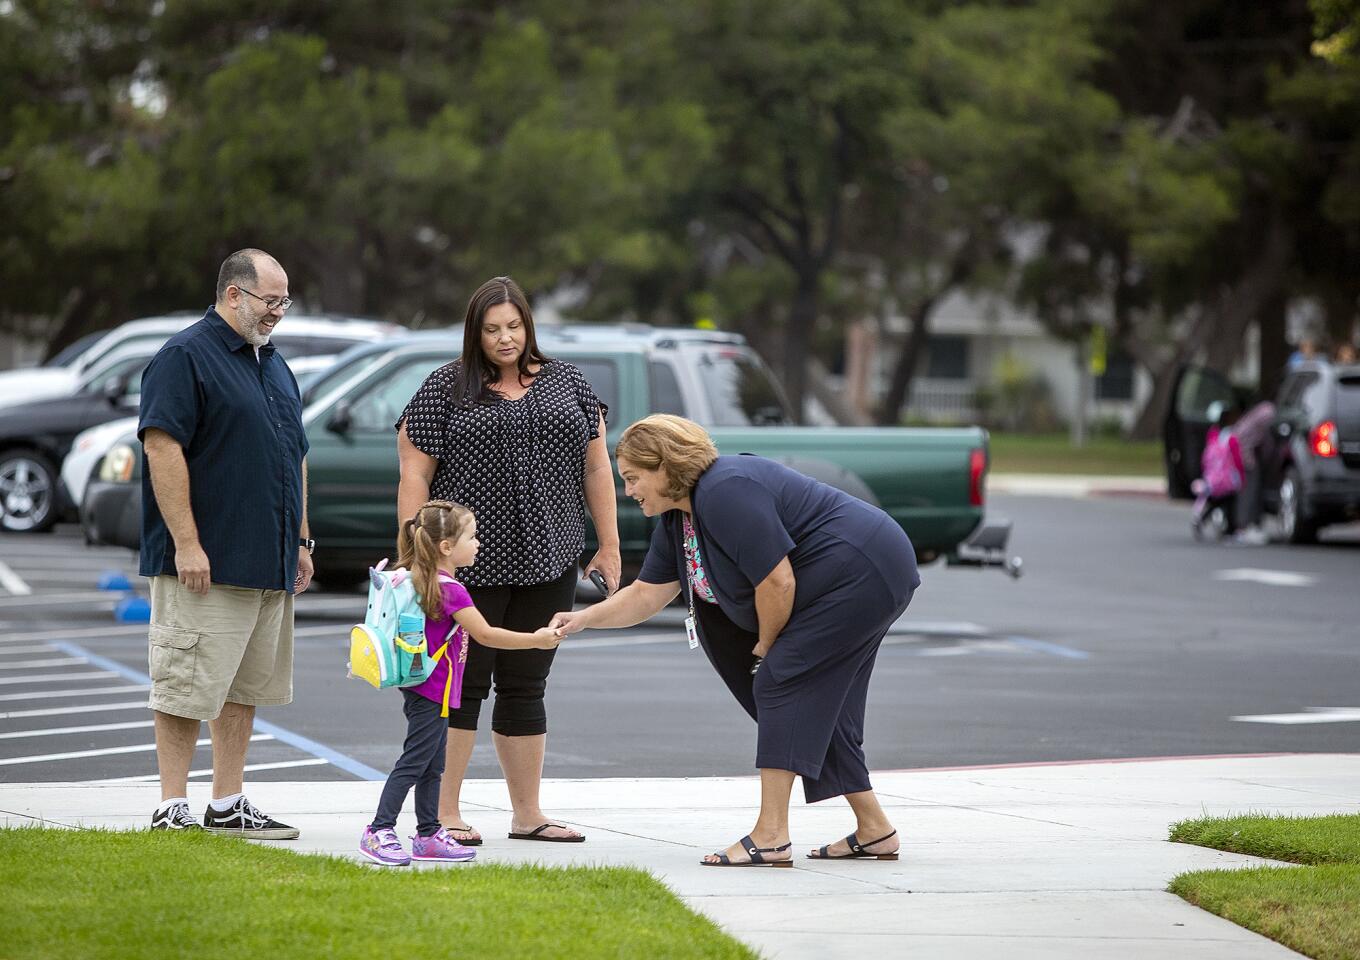 Stacey DeBoom-Howard, the new principal at Adams Elementary School in Costa Mesa, introduces herself to Sierra Herndon, 4, as parents Jorge Suarez and Melanie Smith watch on Tuesday, the first day of school for the Newport-Mesa Unified School District.